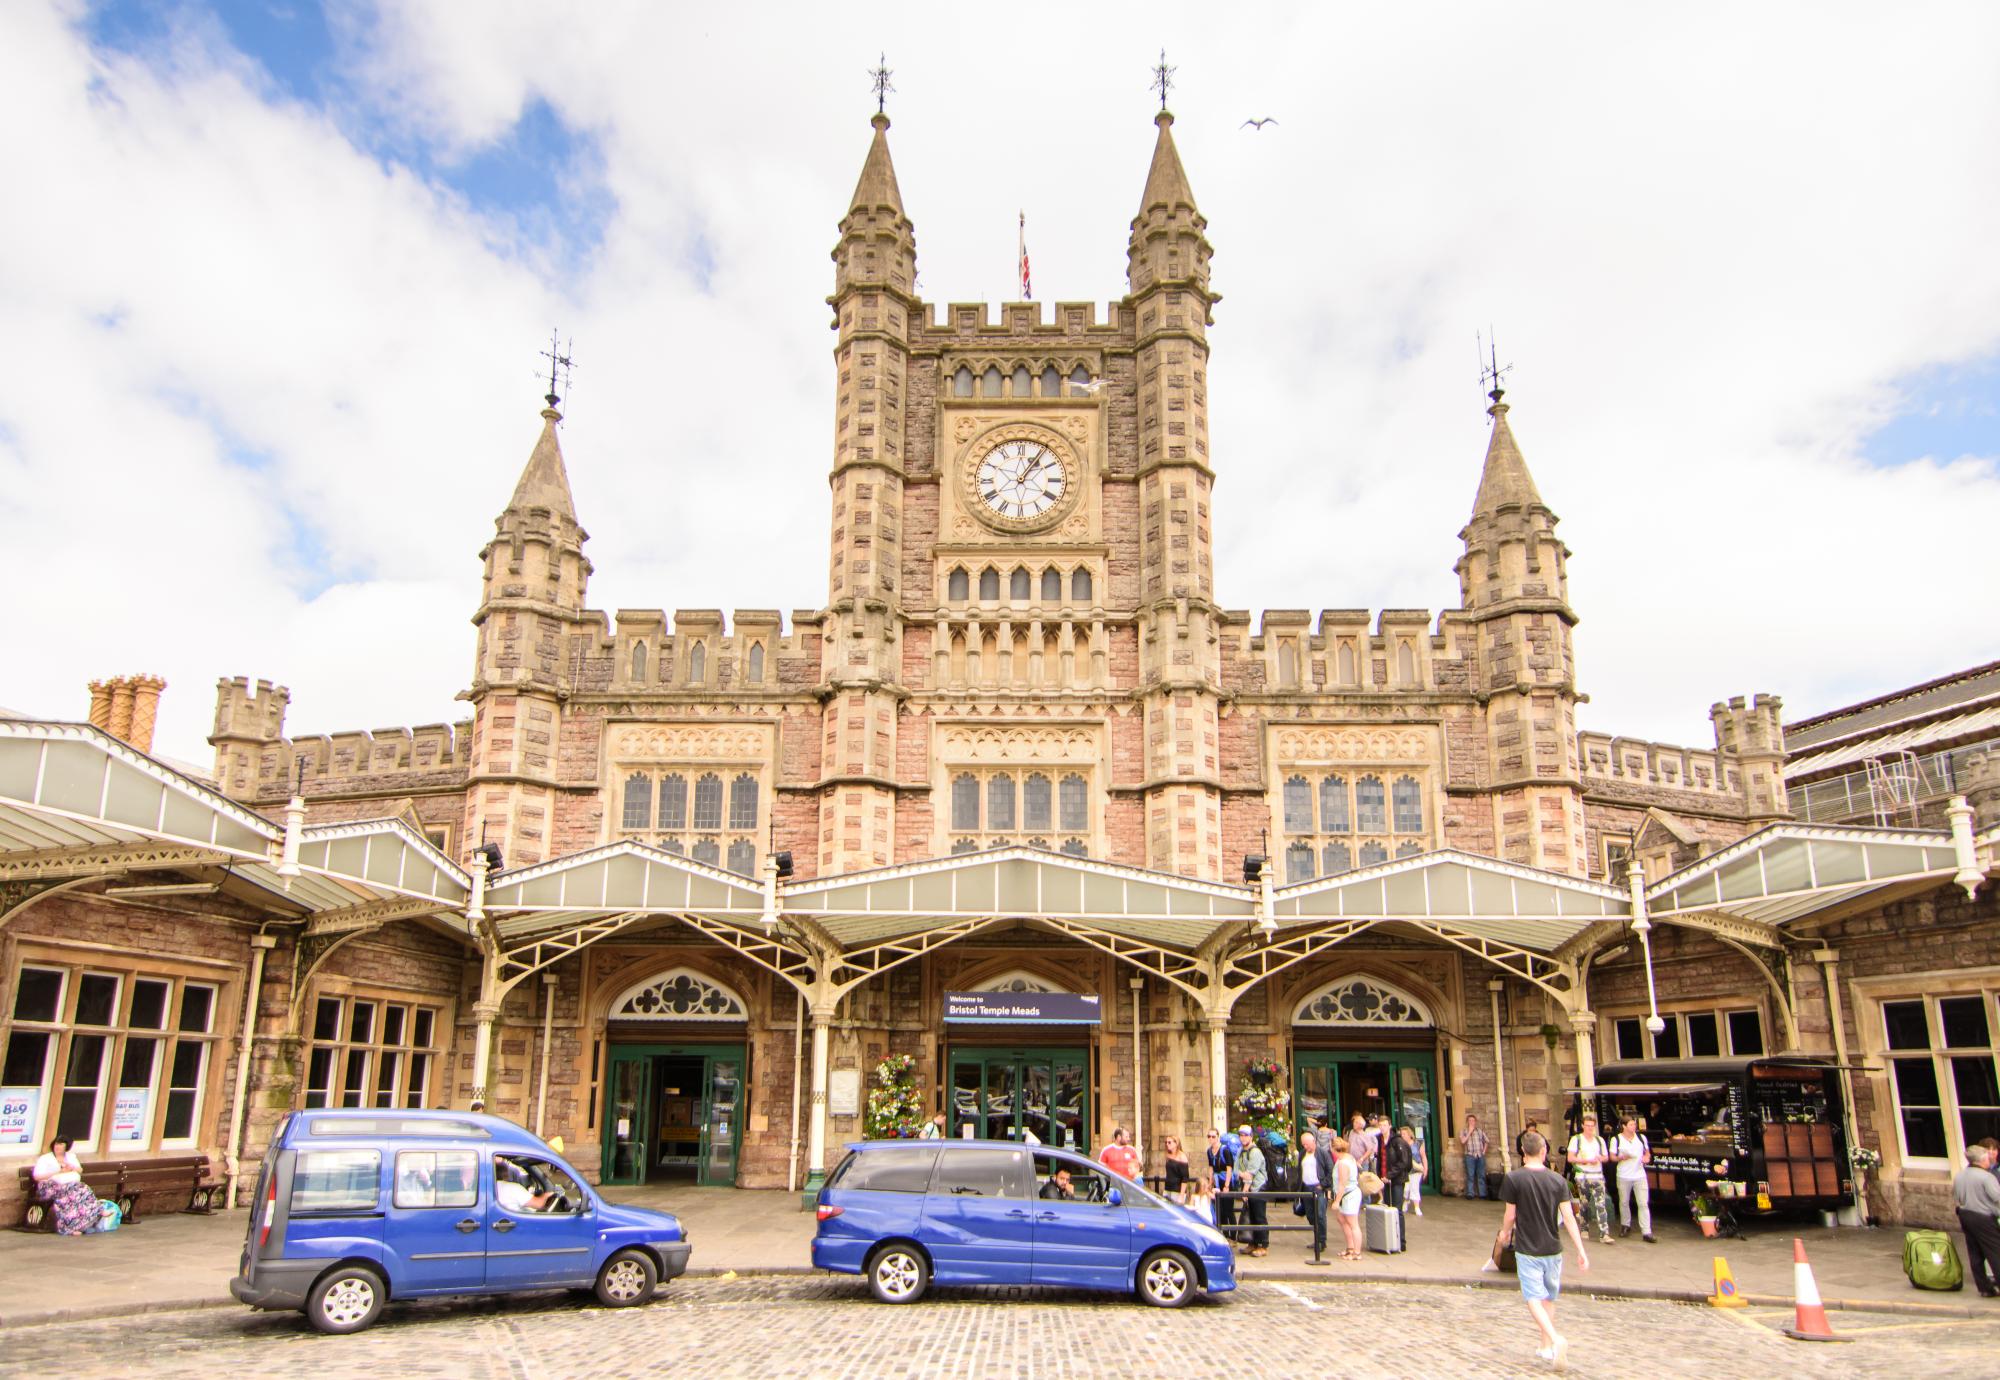 Bristol Temple Meads Station on the Great Western Railway, via Istock 